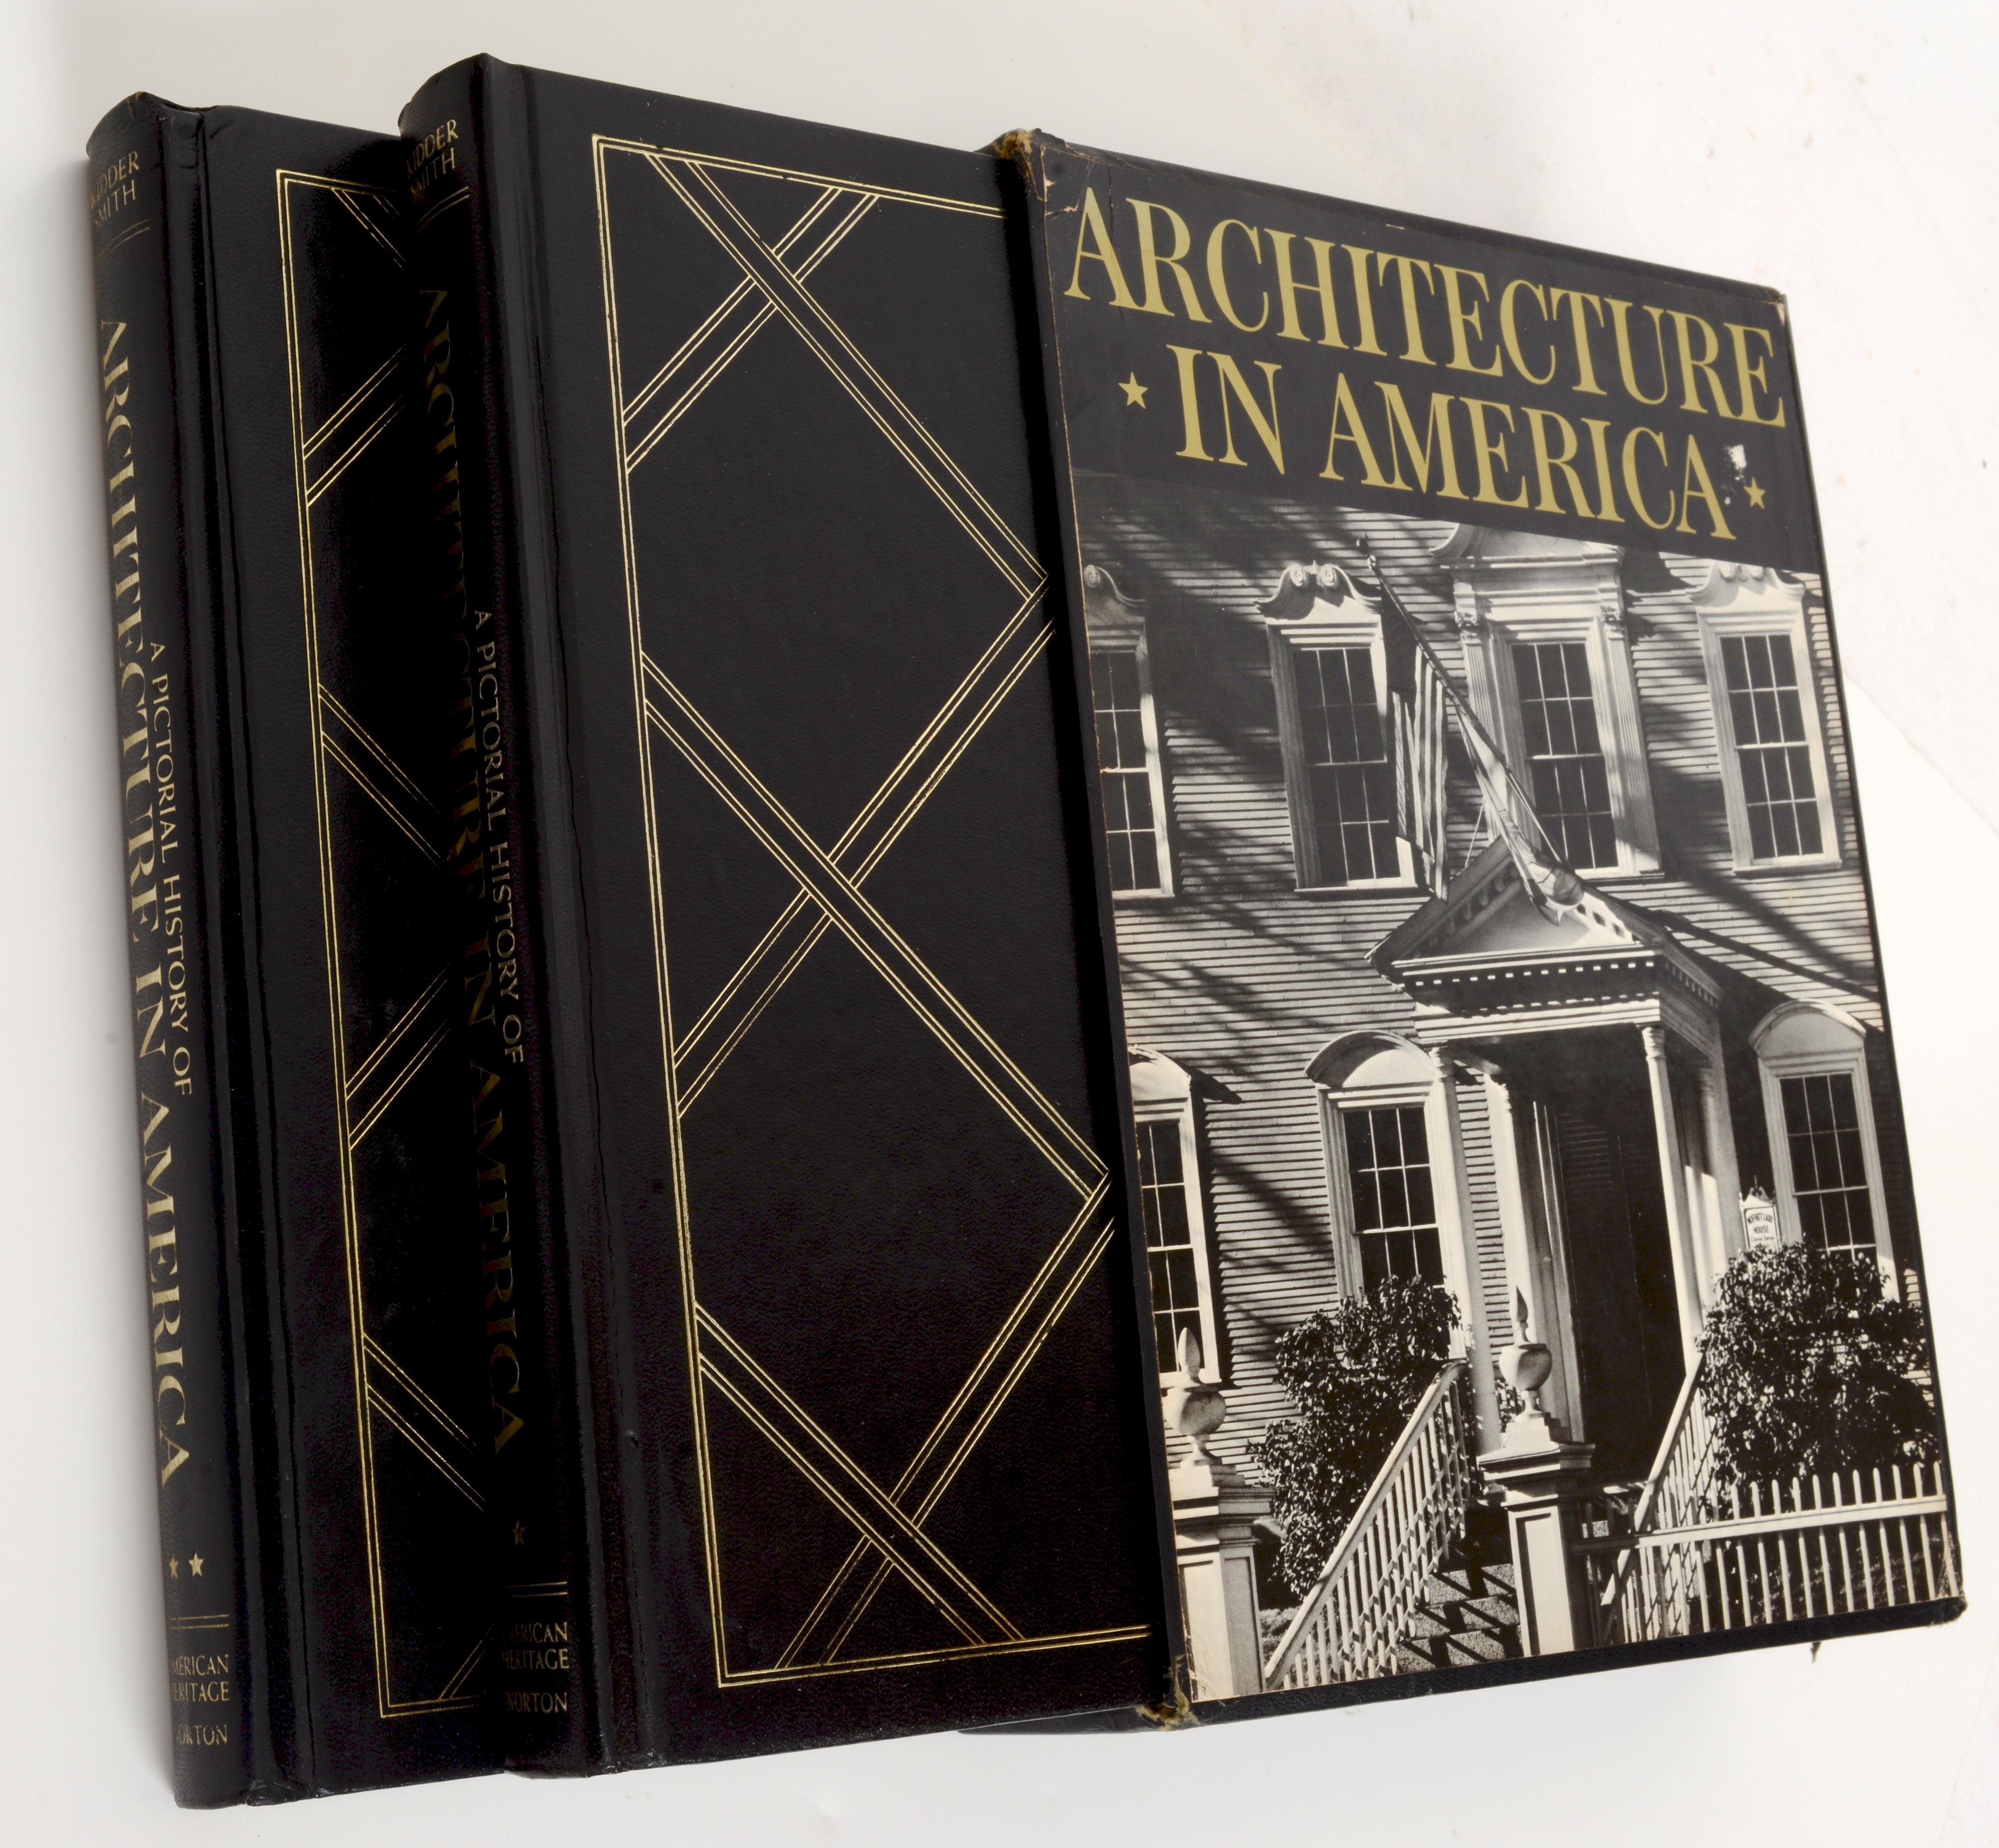 A Pictorial History Of Architecture In America by G. E. Kidder Smith. Published by W. W. Norton & Company, Incorporated, 1976, 1976Published by American Academy of Arts and American Heritage Publishing Co. Inc., NY, 1976. Two volume set, 1st Ed